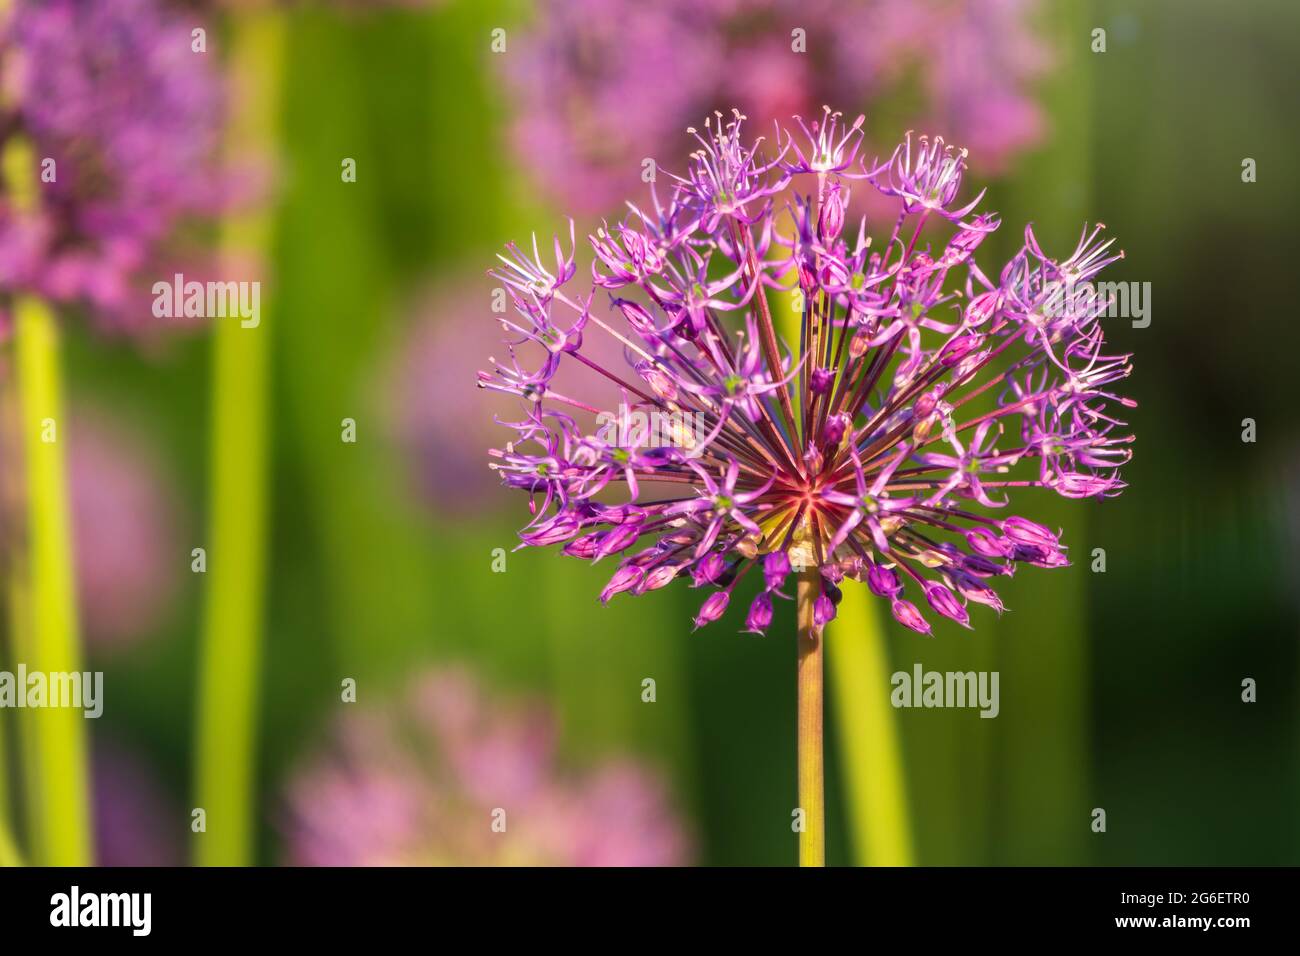 Close-up of the inflorescence of the Rosenbachian onion, Allium rosenbachianum, blooming in the garden in spring or summer. Stock Photo